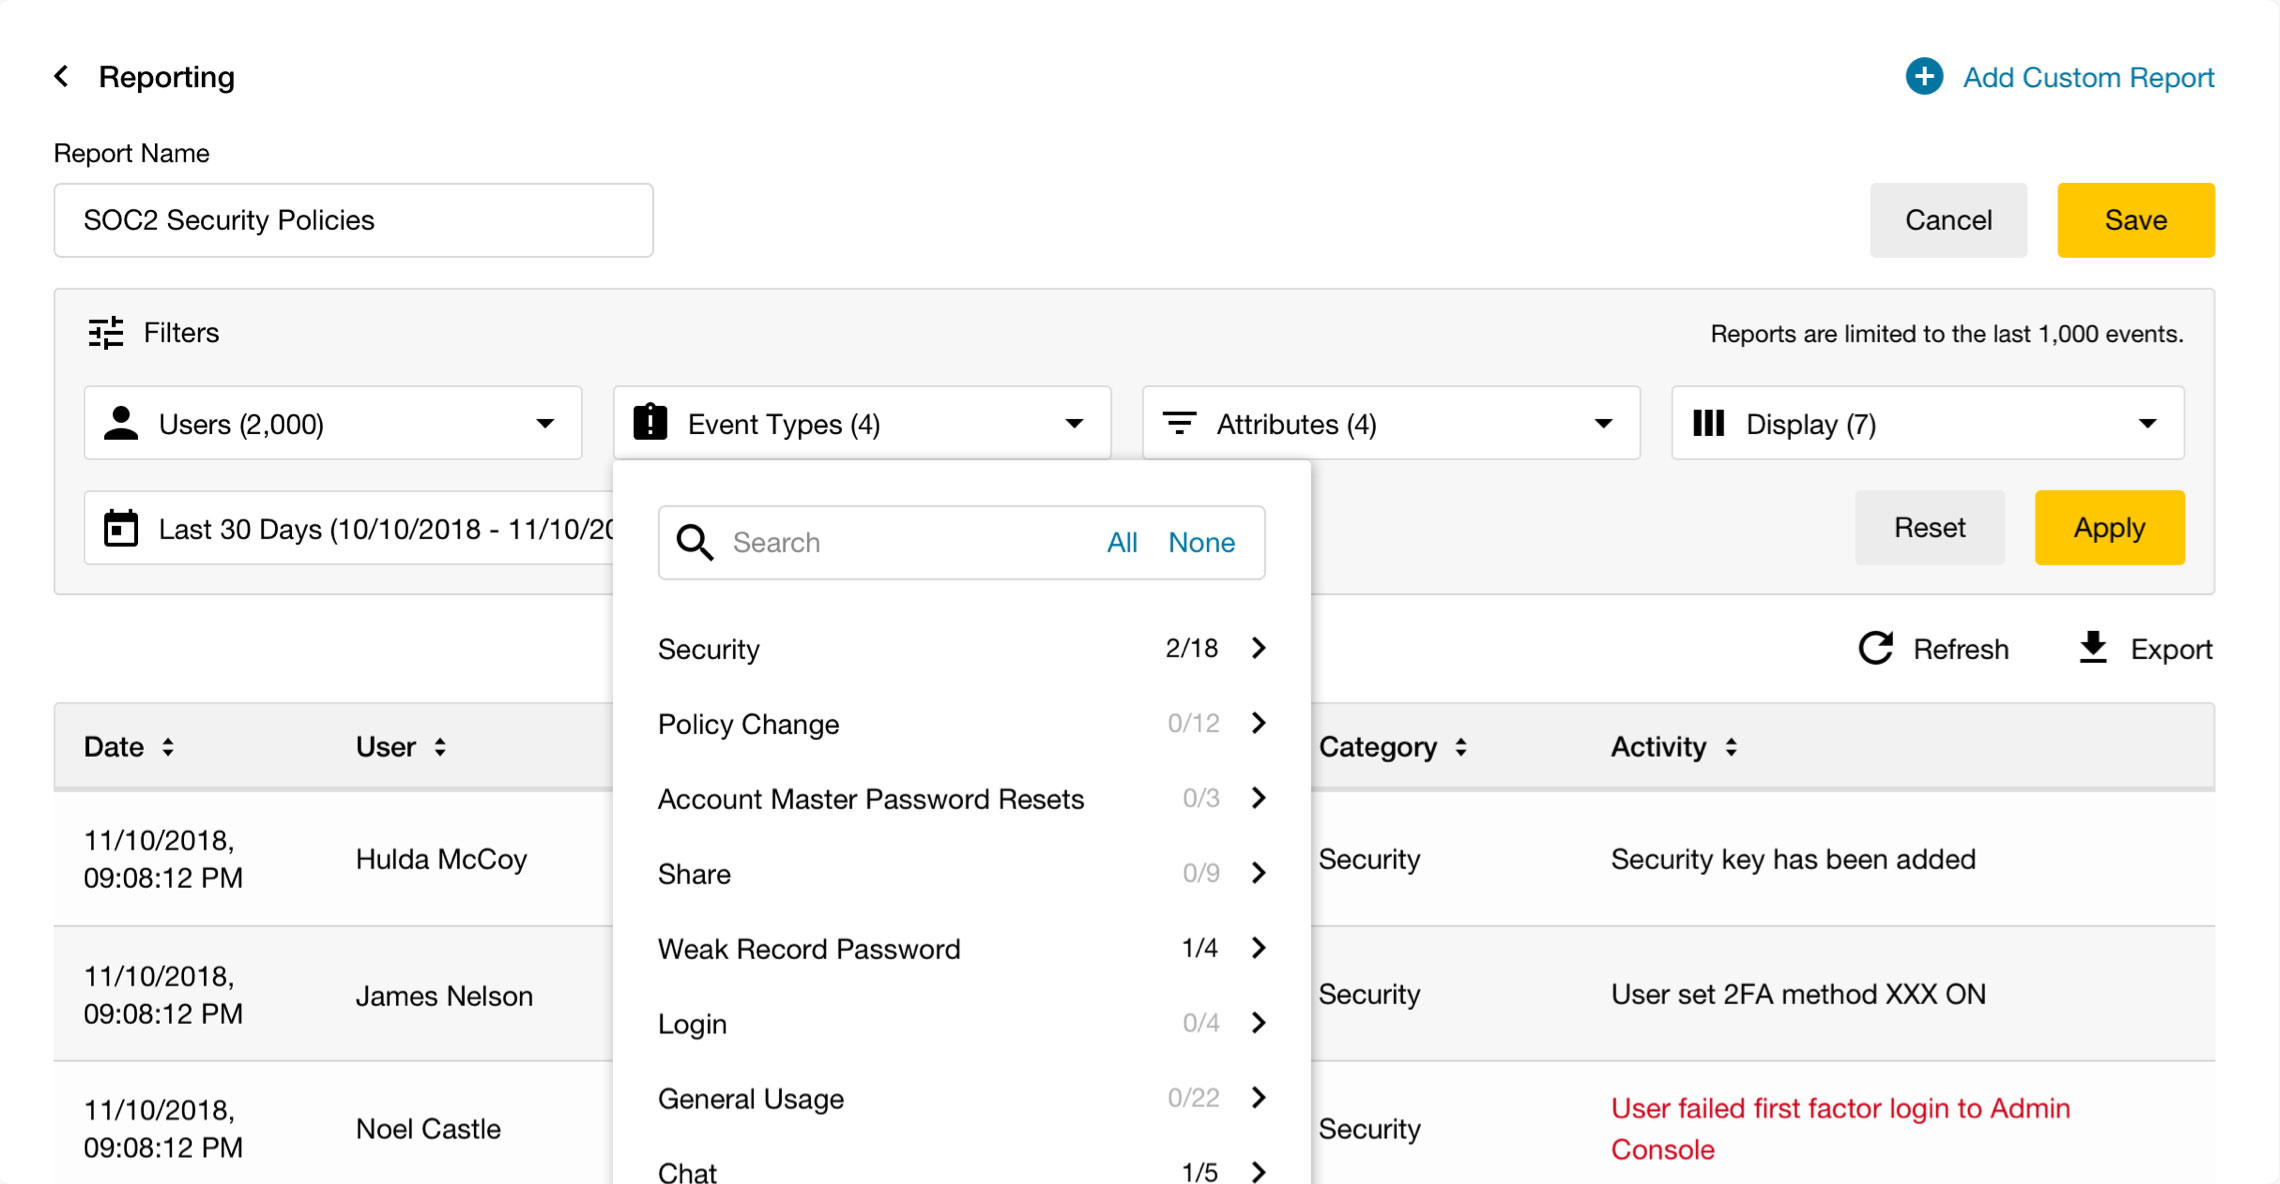 Customise reports with a variety of attributes to focus views